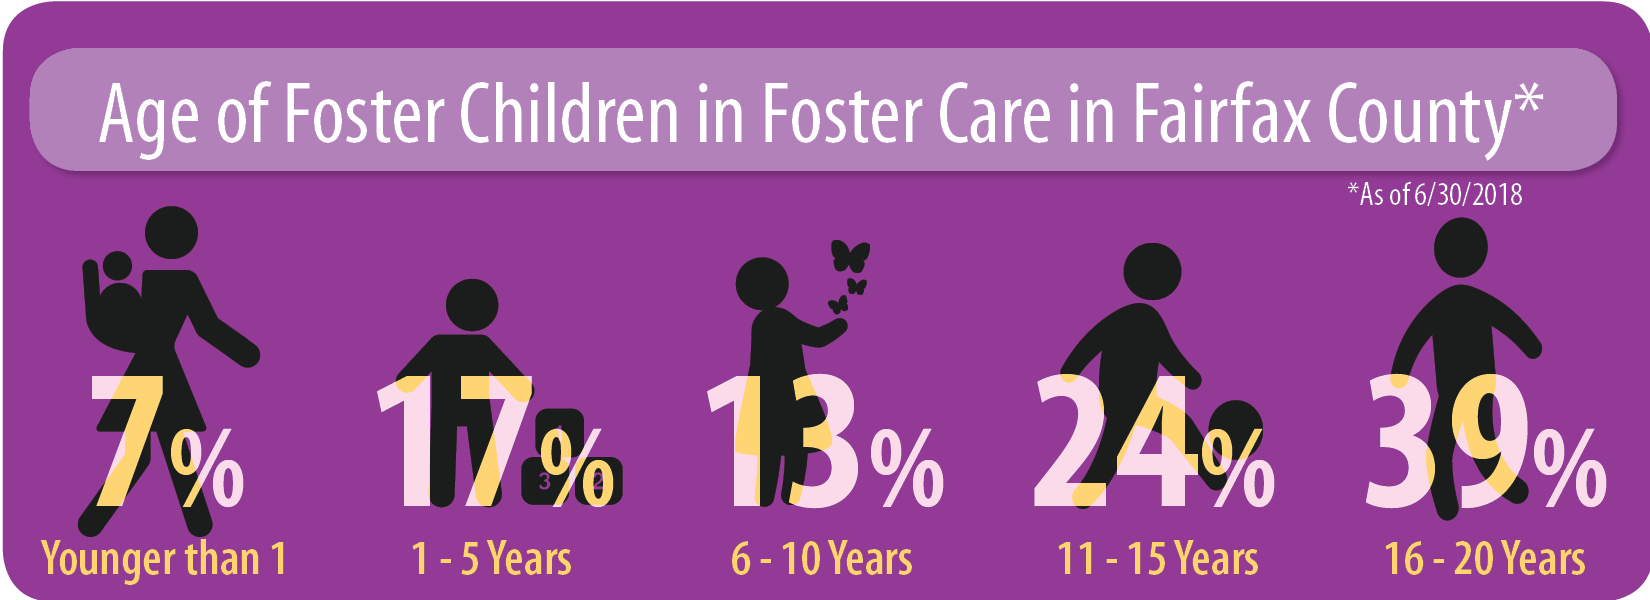 Story in Stats graphic - Age of Foster Children in Foster Care in Fairfax County